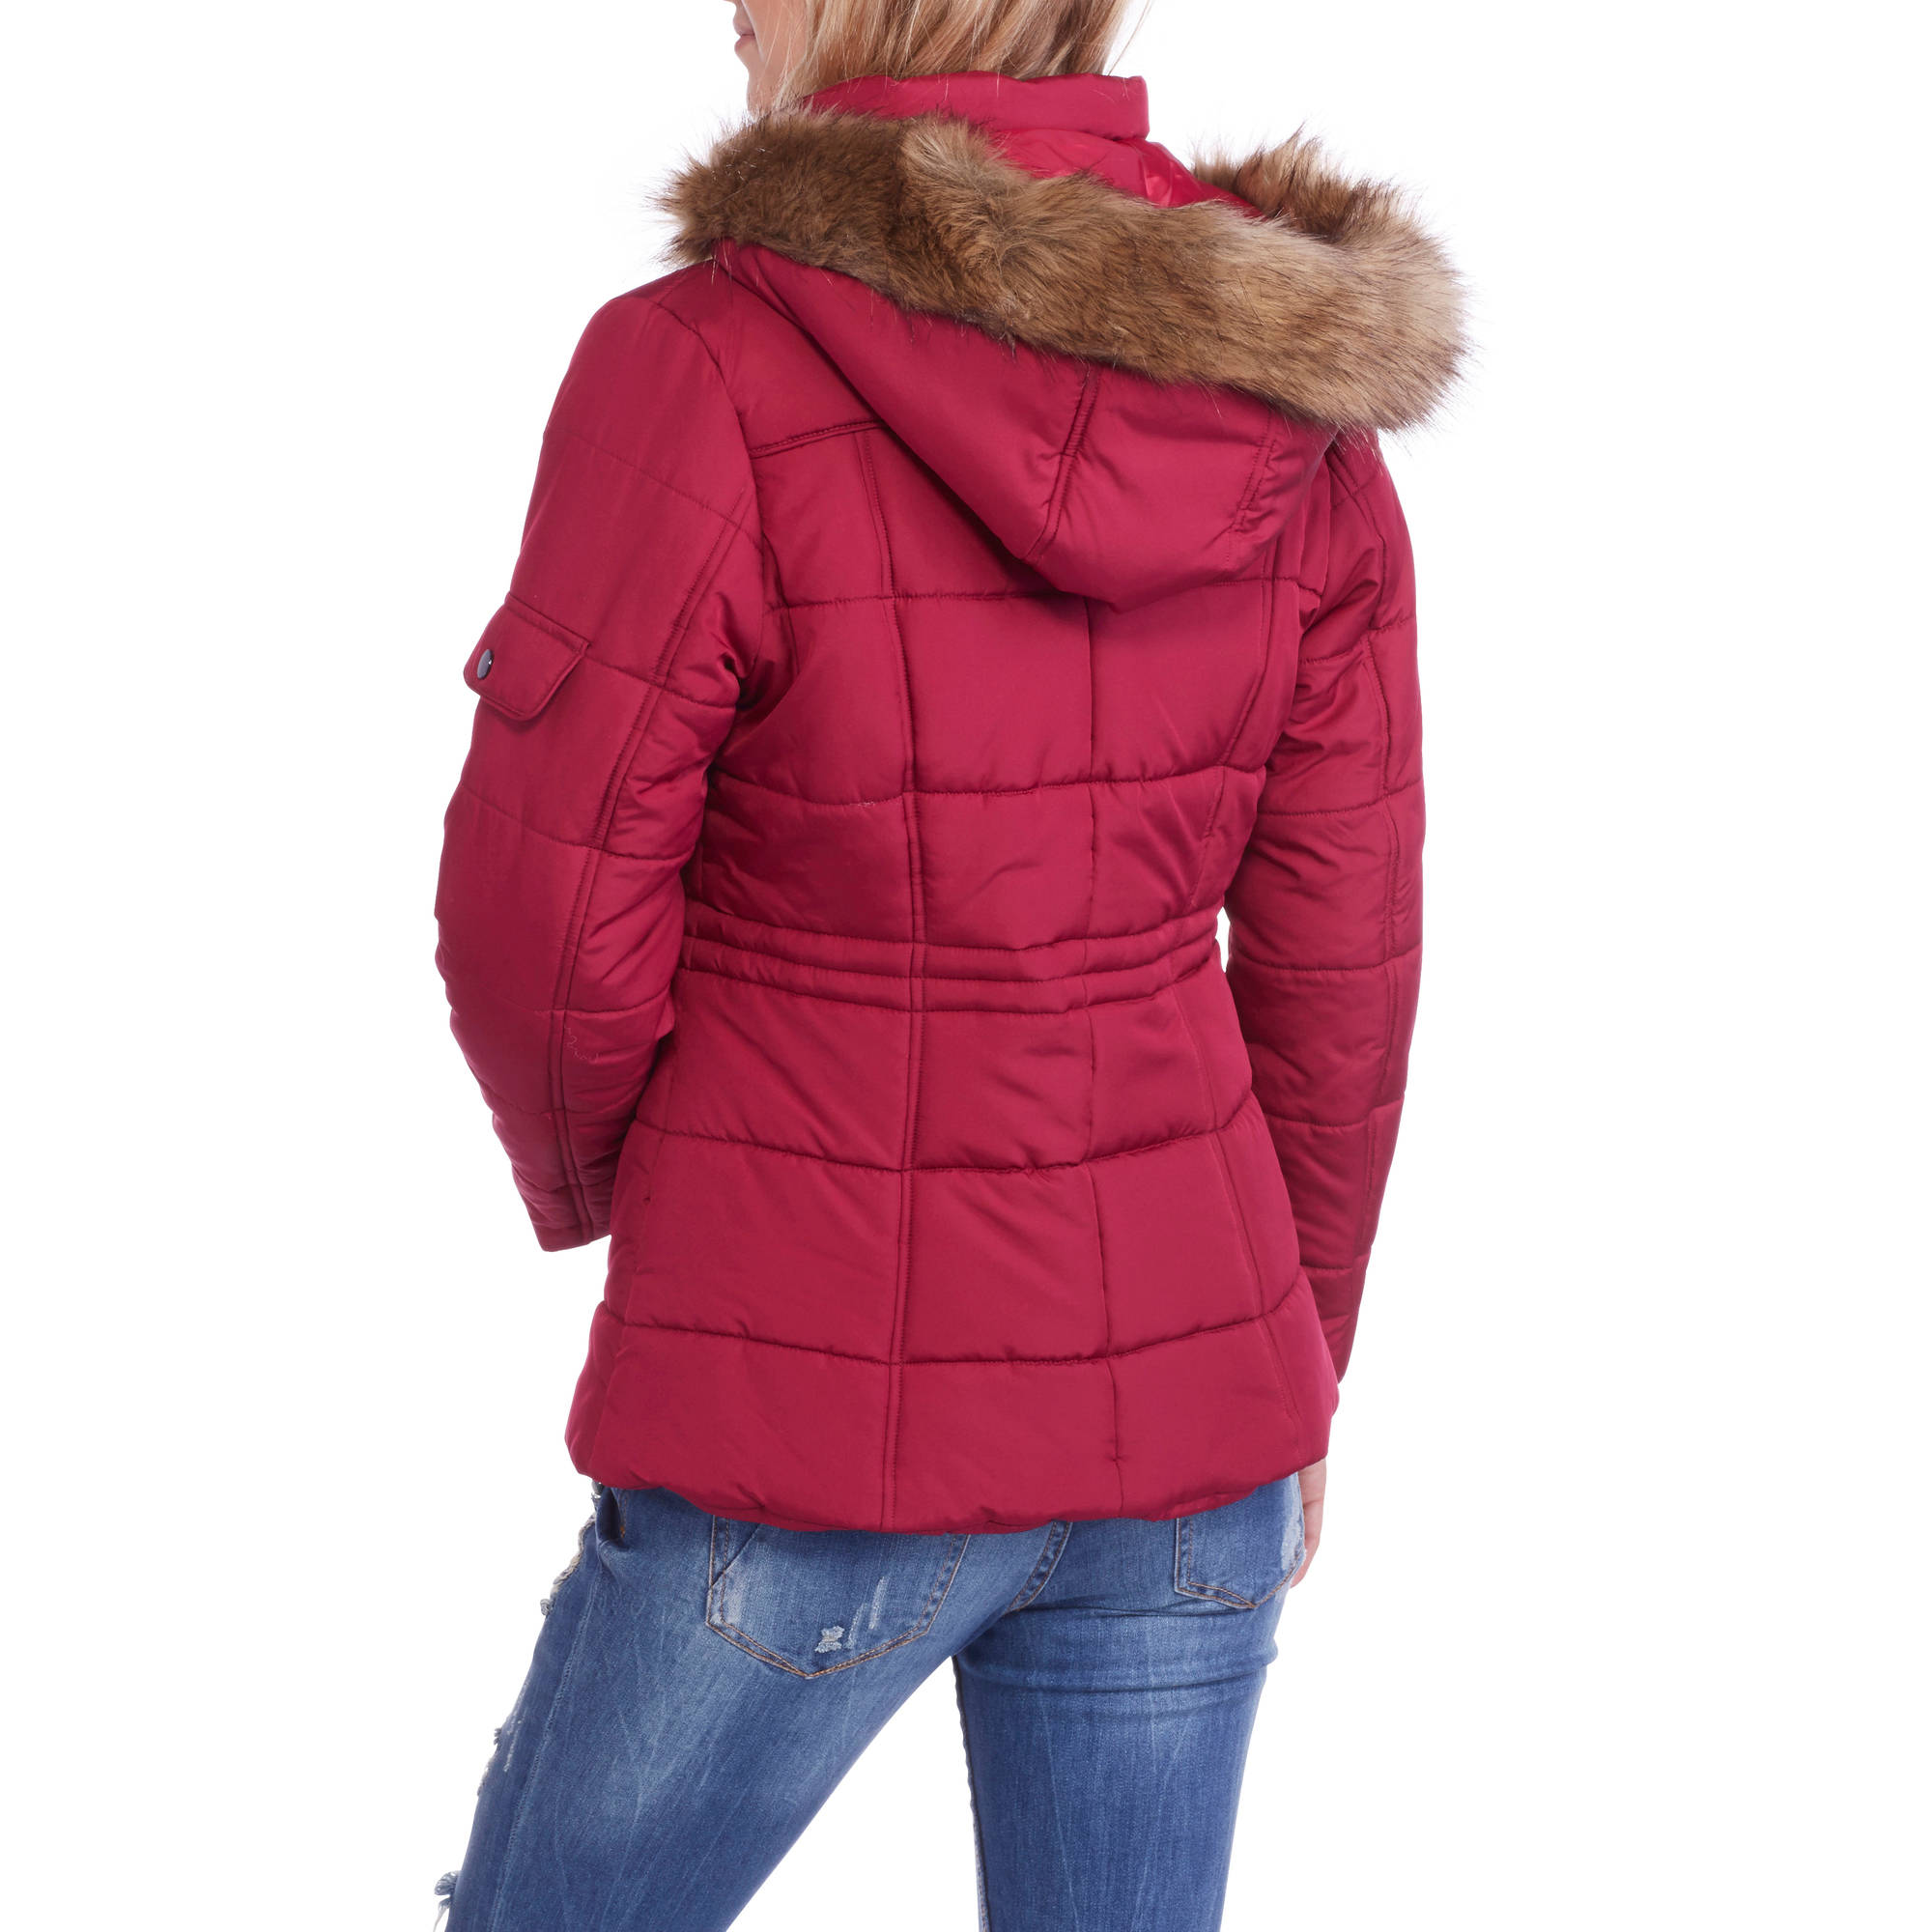 Women's Quilted Puffer Jacket with Fur-Trim Hood - image 2 of 2